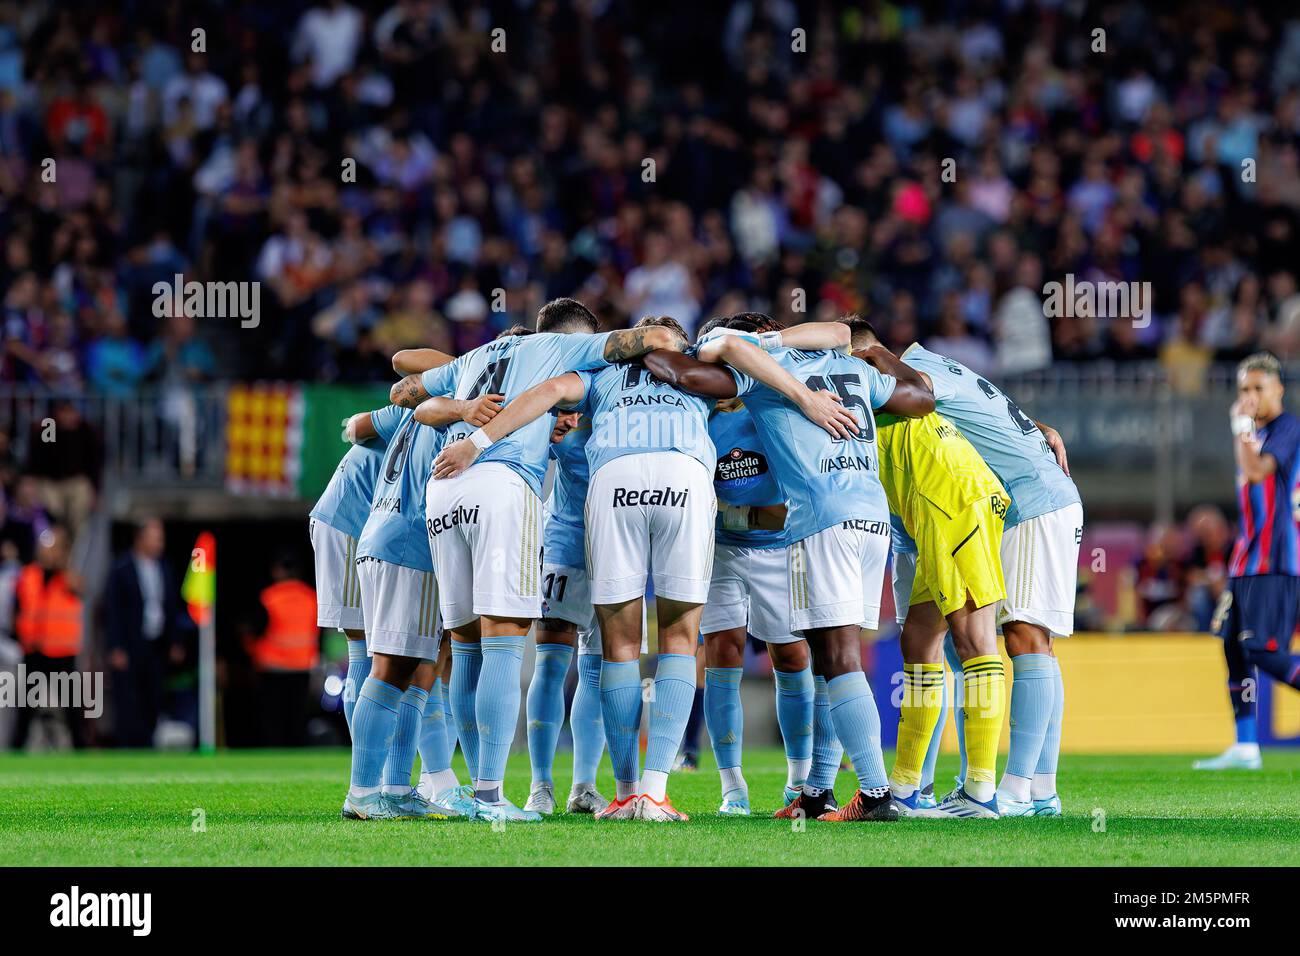 BARCELONA - OCT 9: Celta players concentrate prior to the LaLiga match between FC Barcelona and RC Celta at the Spotify Camp Nou Stadium on October 9, Stock Photo